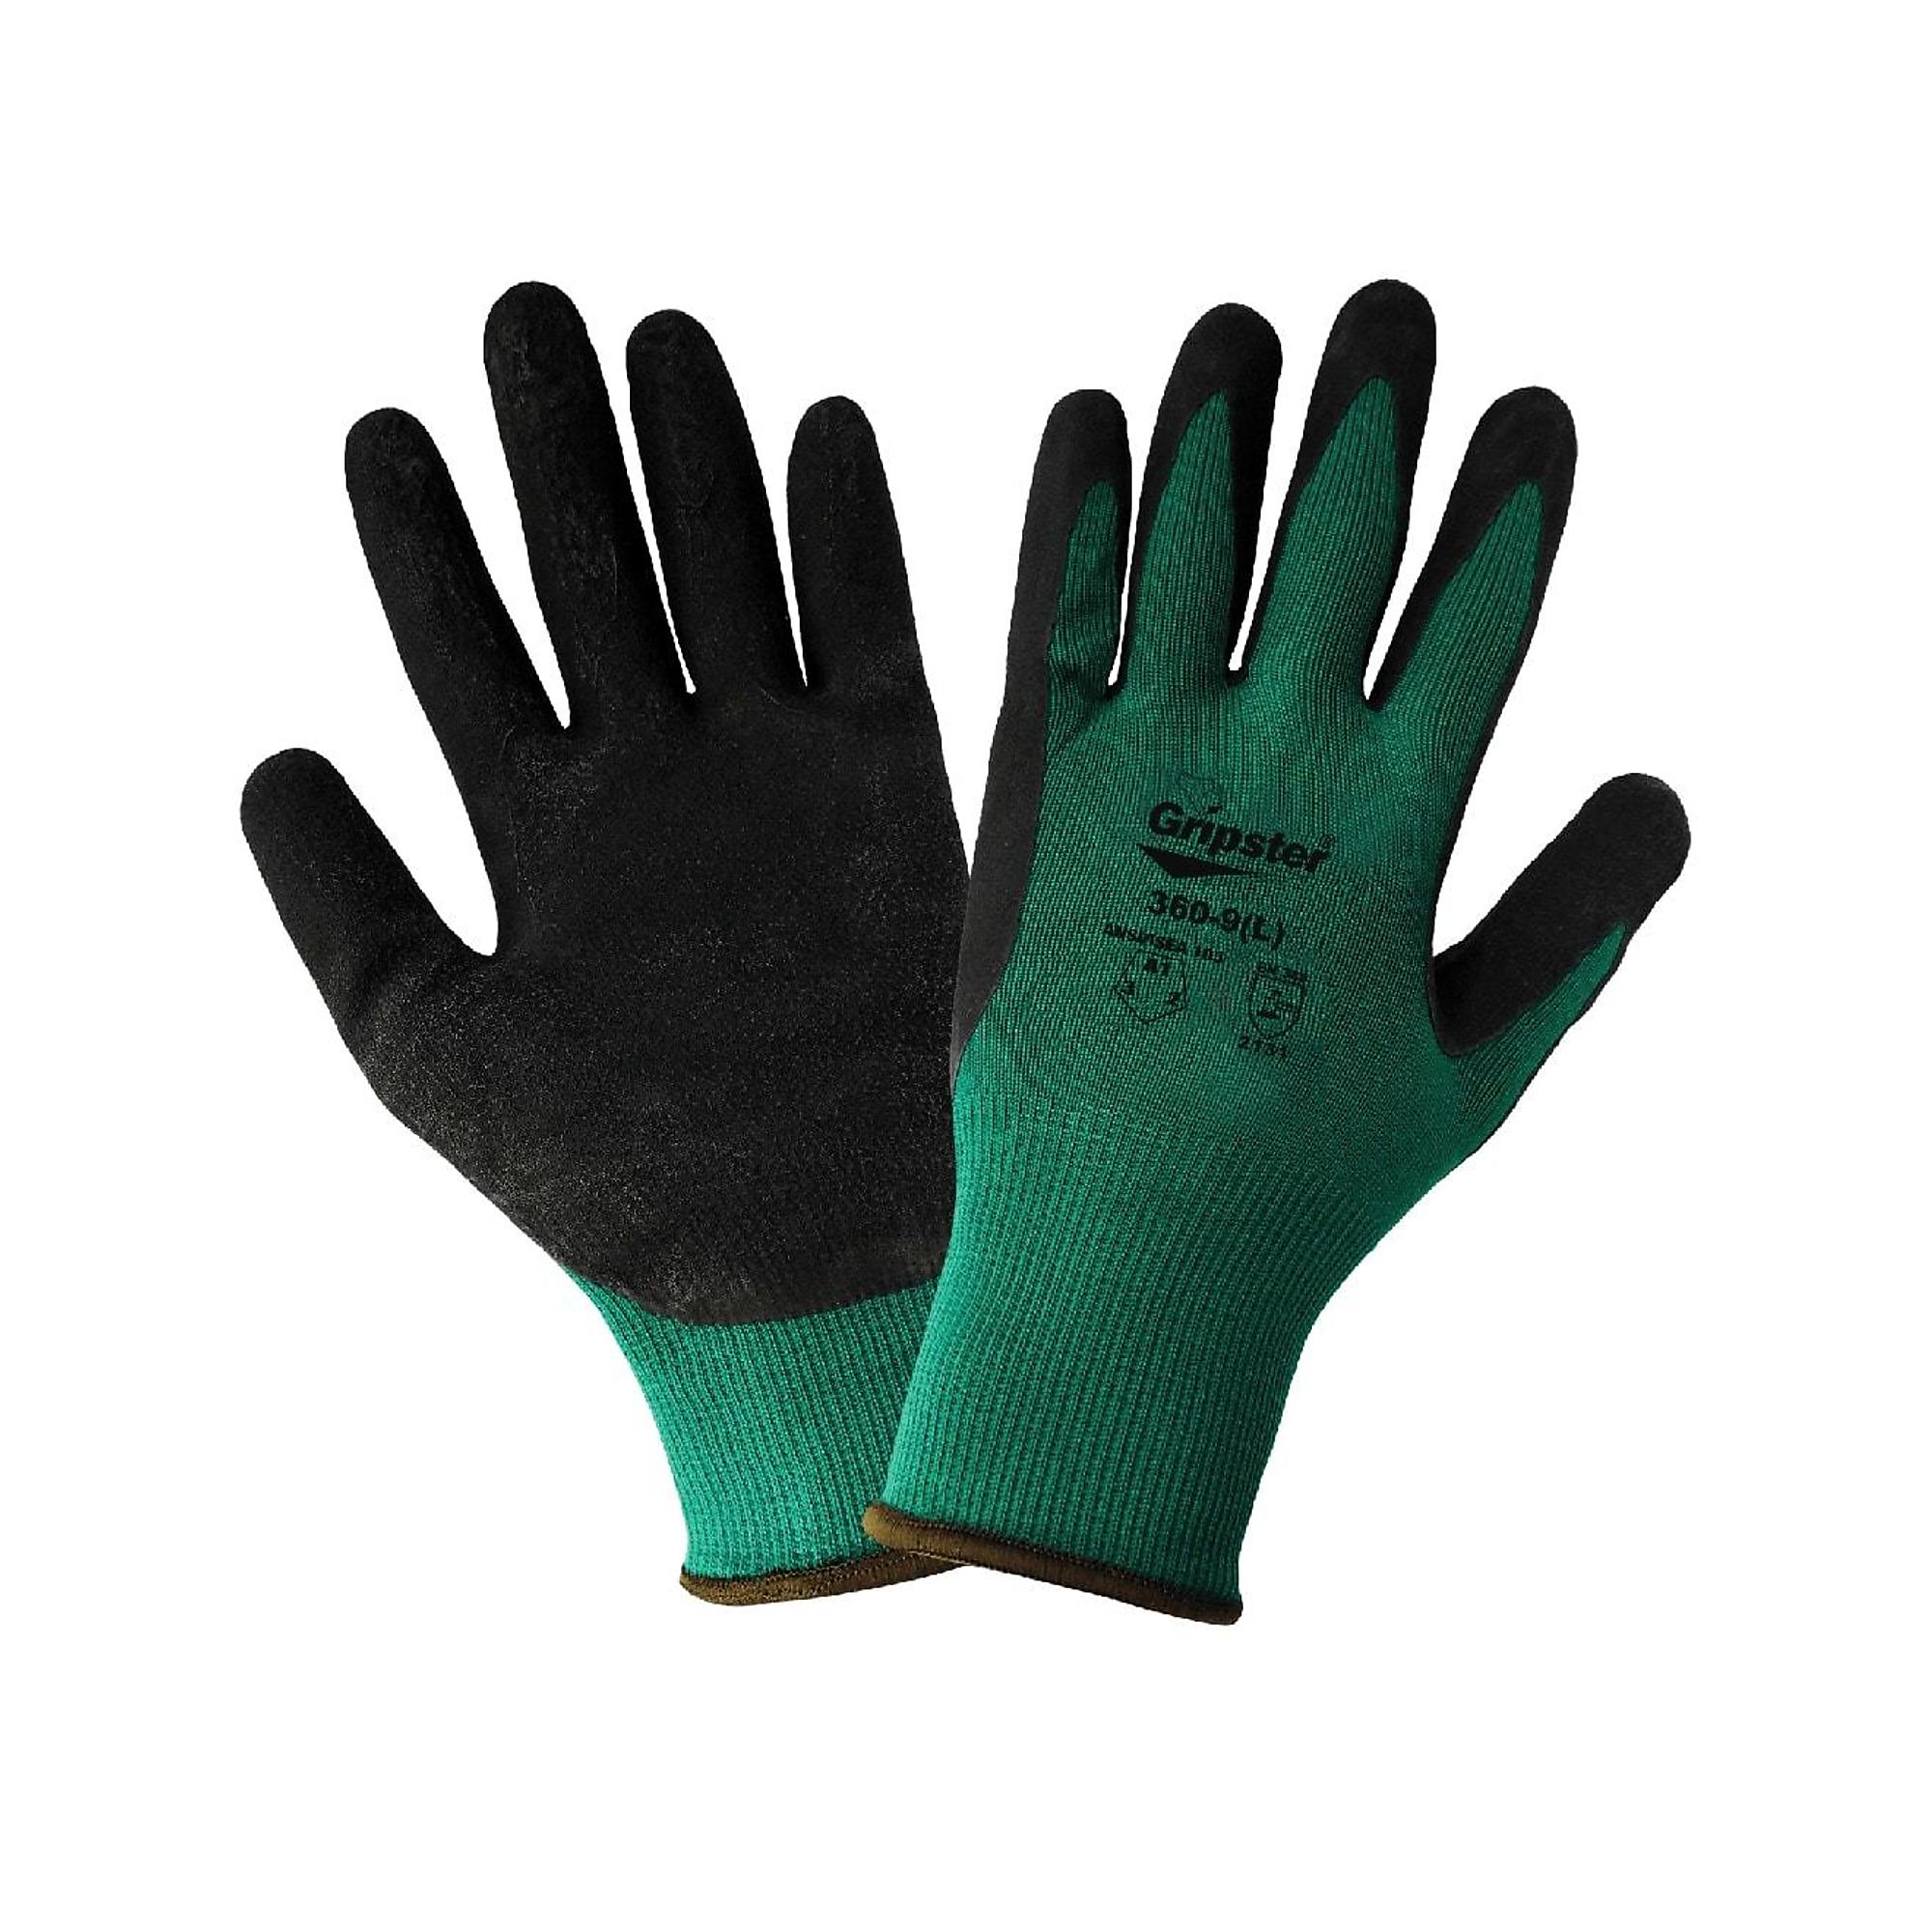 Global Glove Gripster , Green, Black Rub Coated, Cut Resistant A1 Gloves - 12 Pairs, Size S, Color Green/Black, Included (qty.) 12 Model 360-7(S)